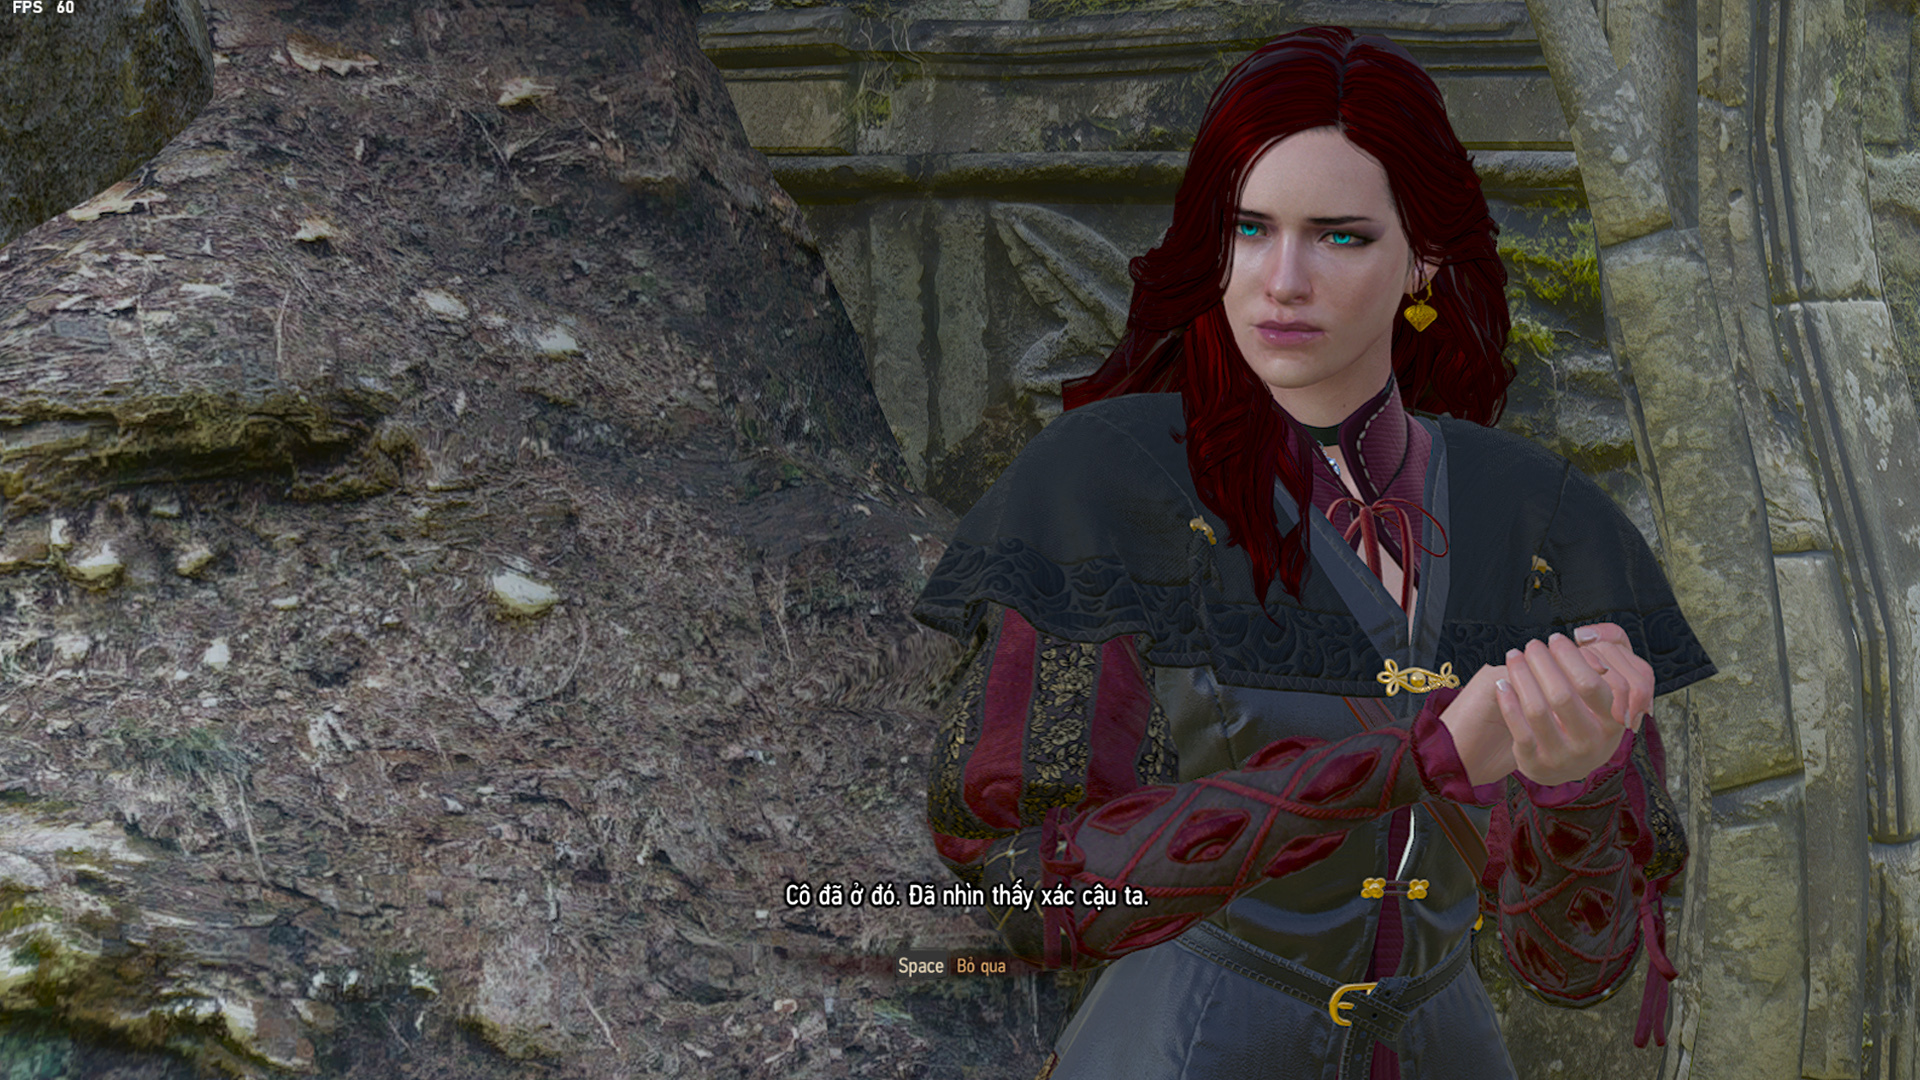 The witcher 3 alternative look for yennefer фото 15